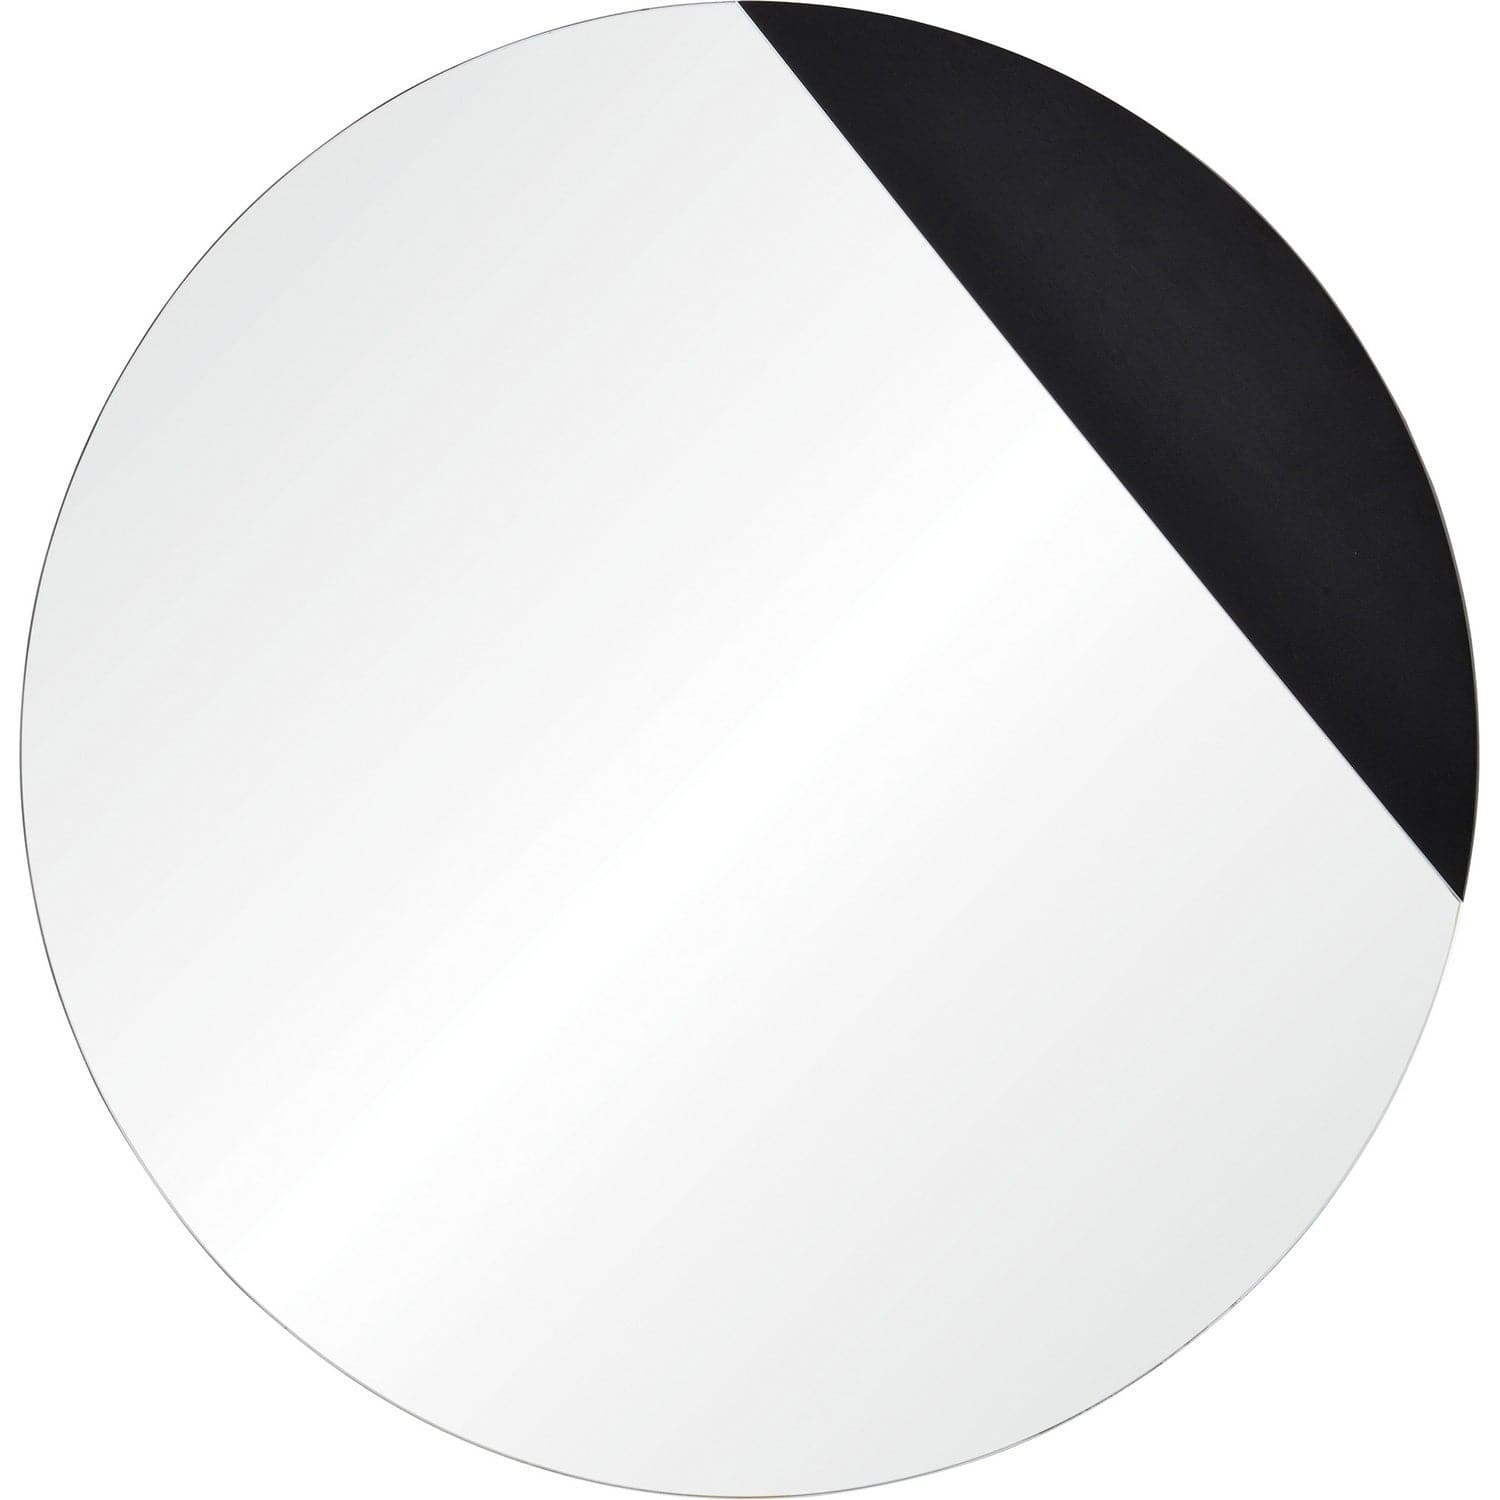 Renwil - MT2255 - Mirrors/Pictures - Mirrors-Oval/Rd.